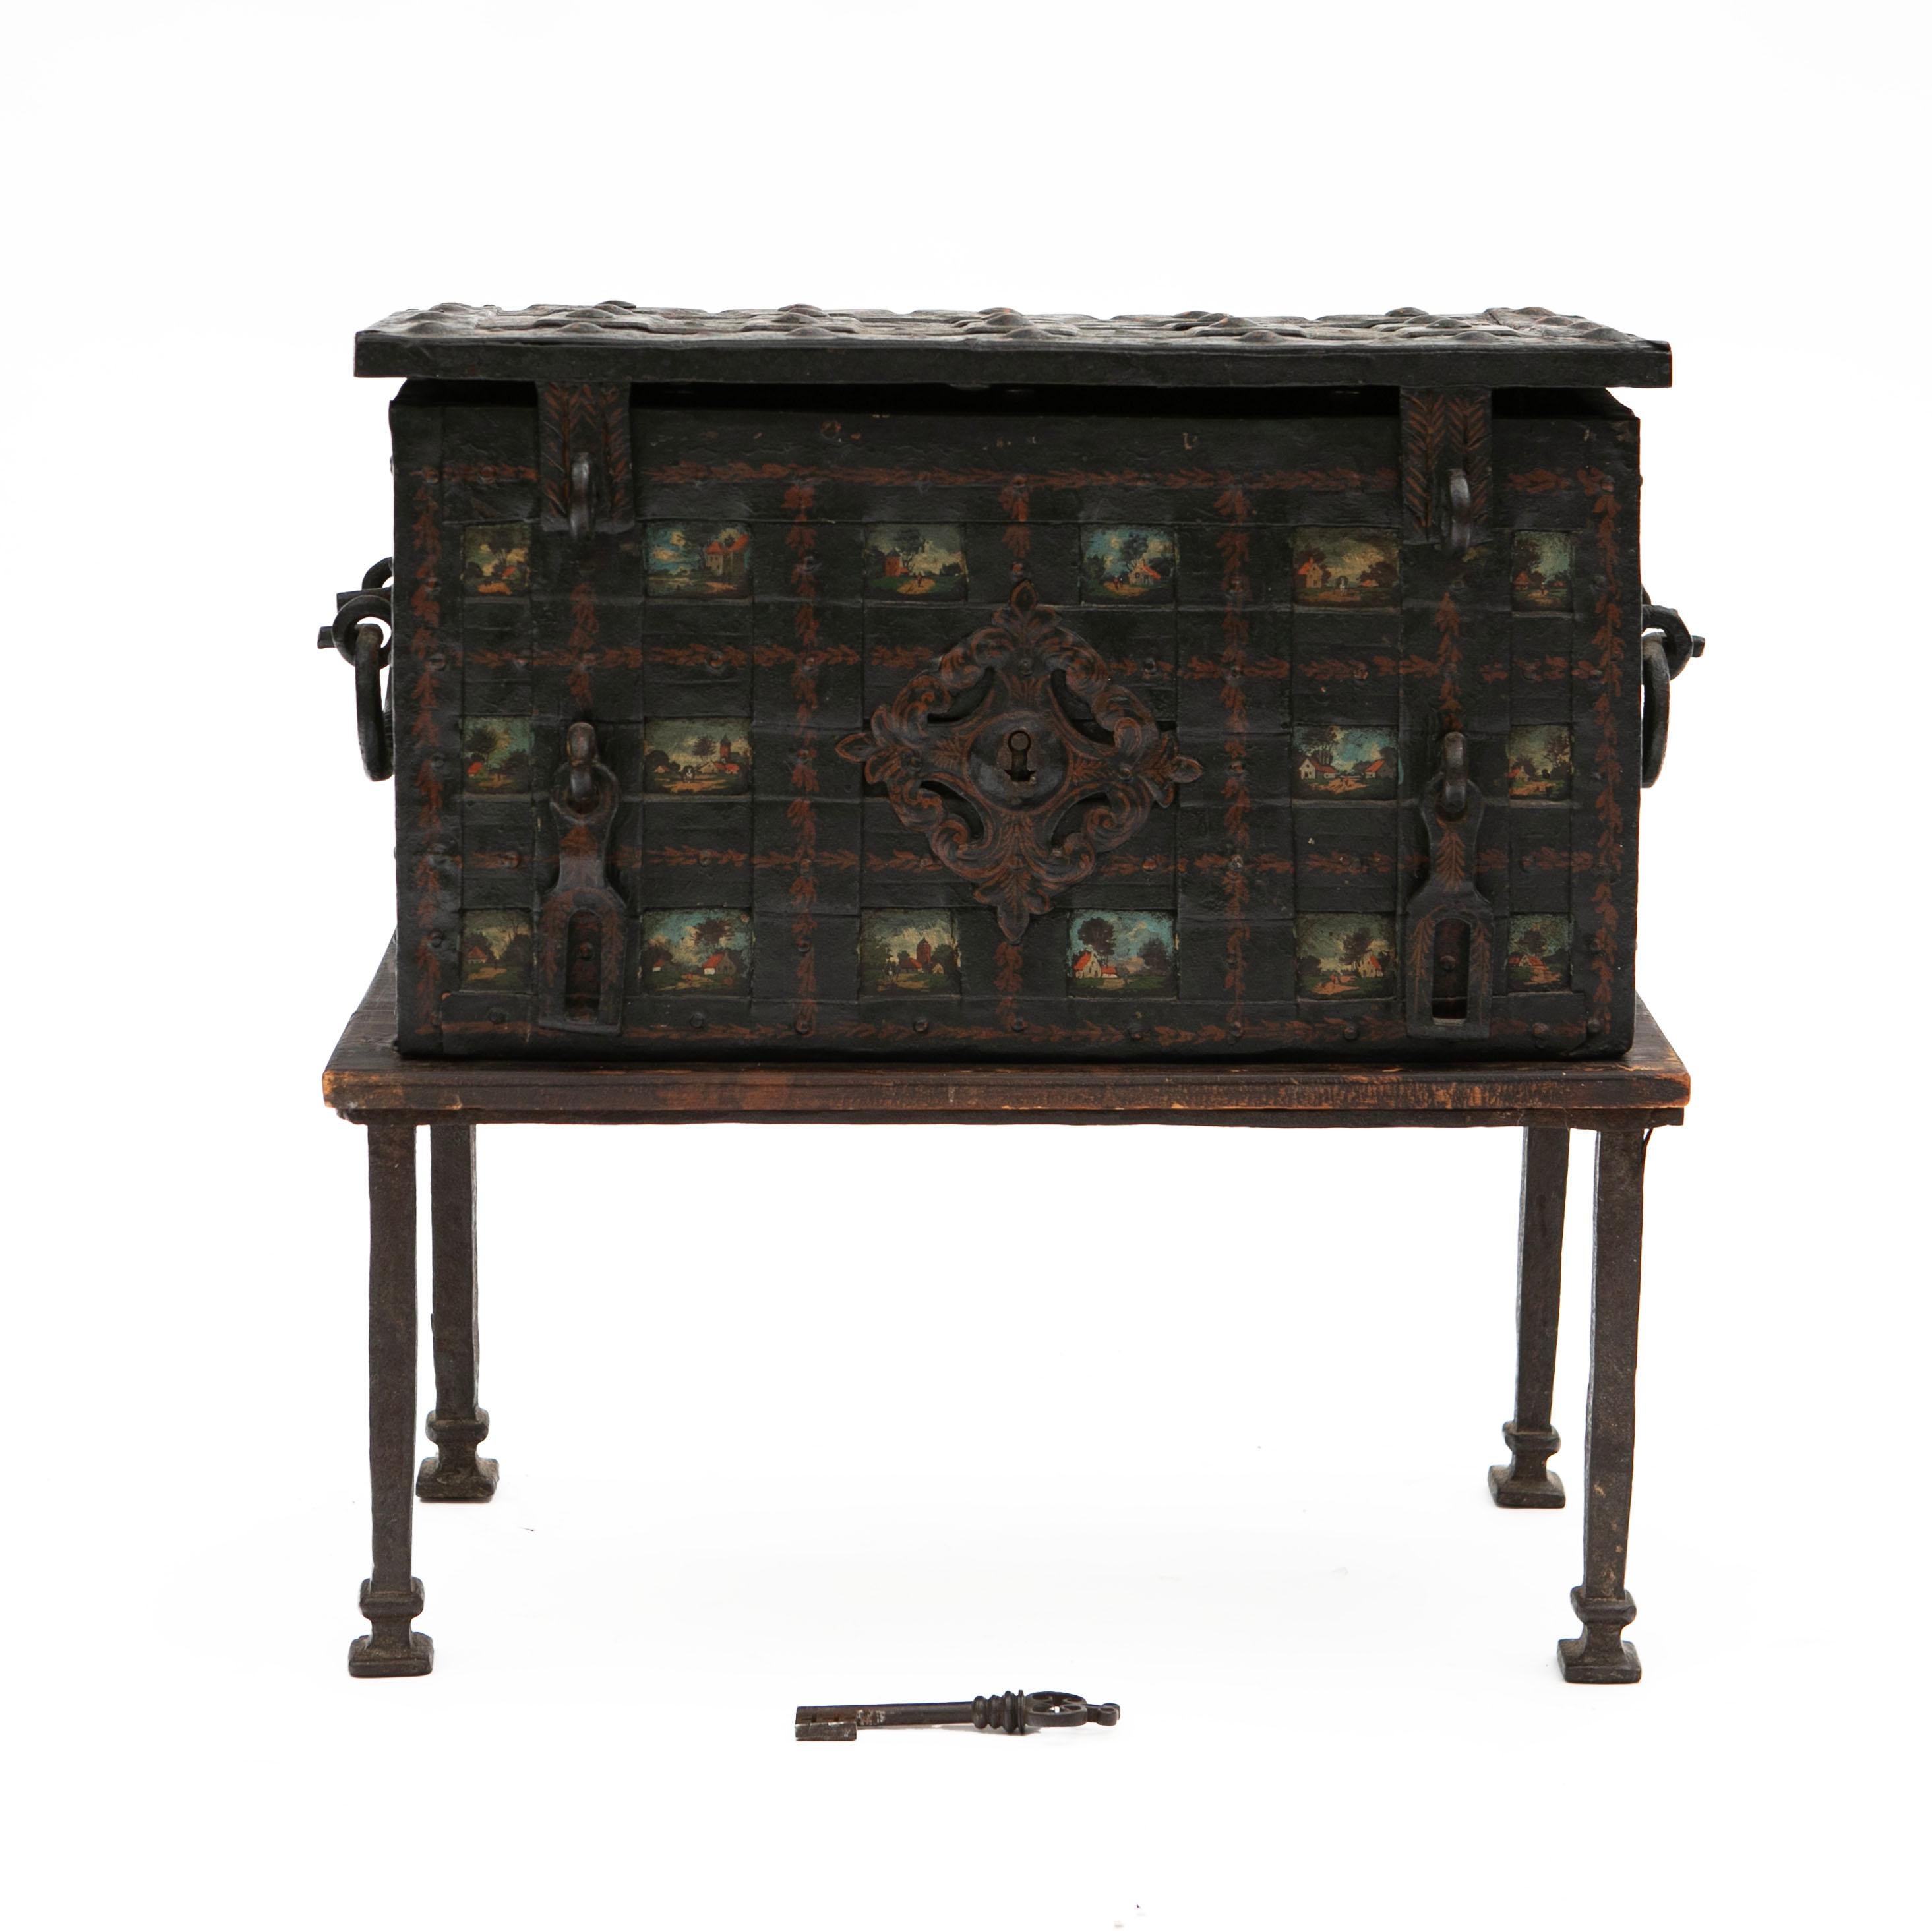 A baroque period iron armada strongbox, or traveling safe, in its original condition, showcasing a beautiful natural patina.

This coffer is richly decorated with small polychrome landscape scenes depicting houses, animals, people, etc. It features